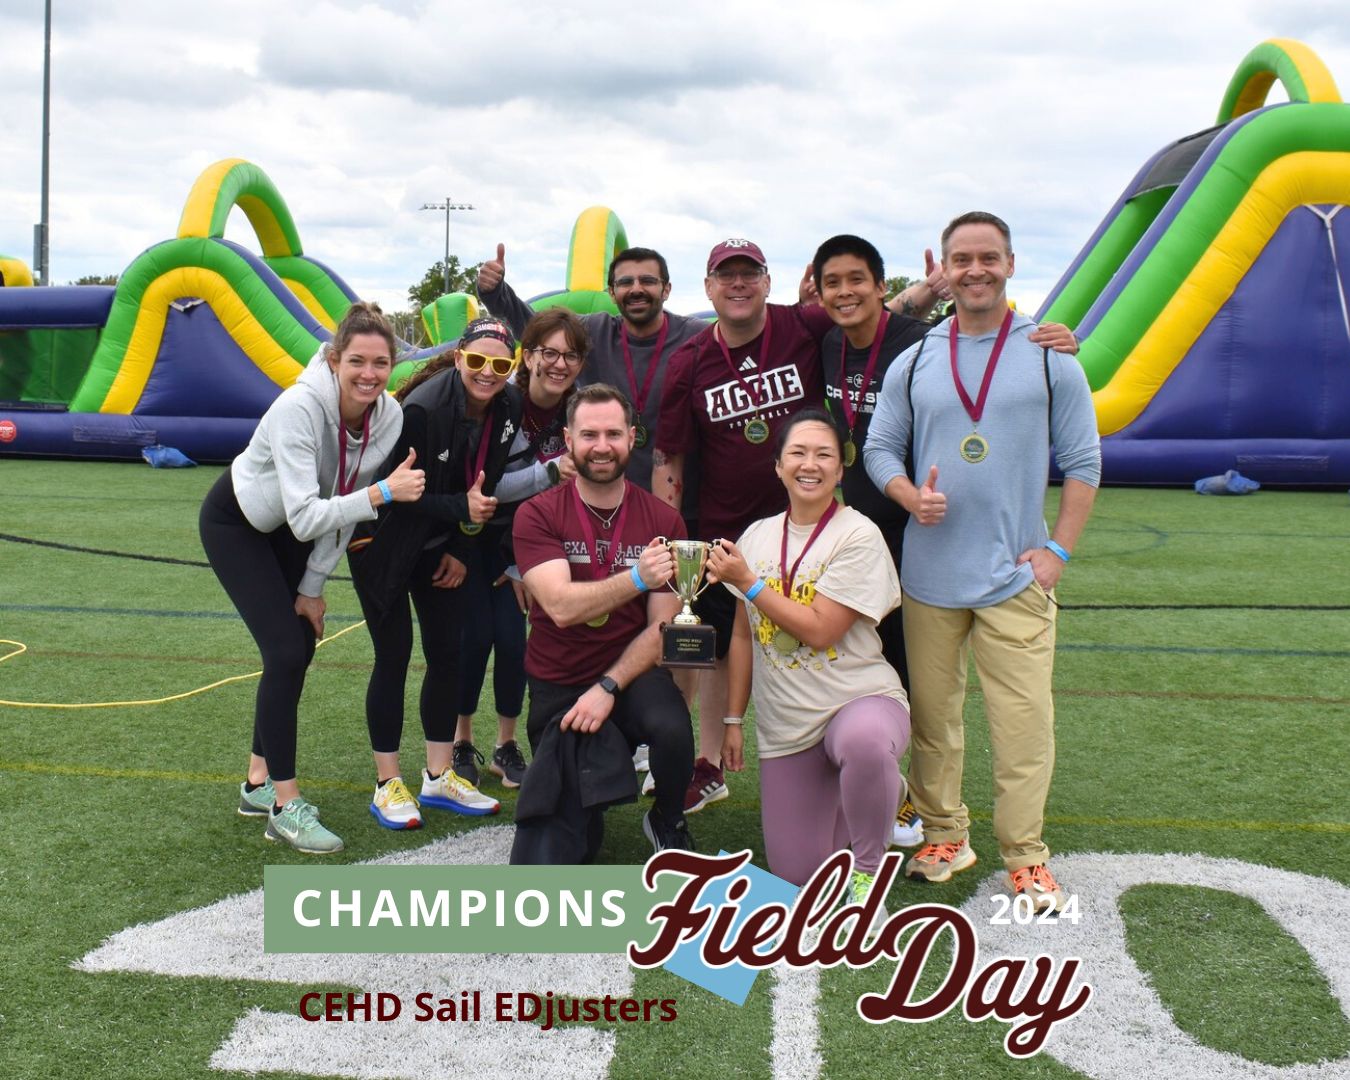 CEHD Sail EDjusters team posing at Field Day 2024